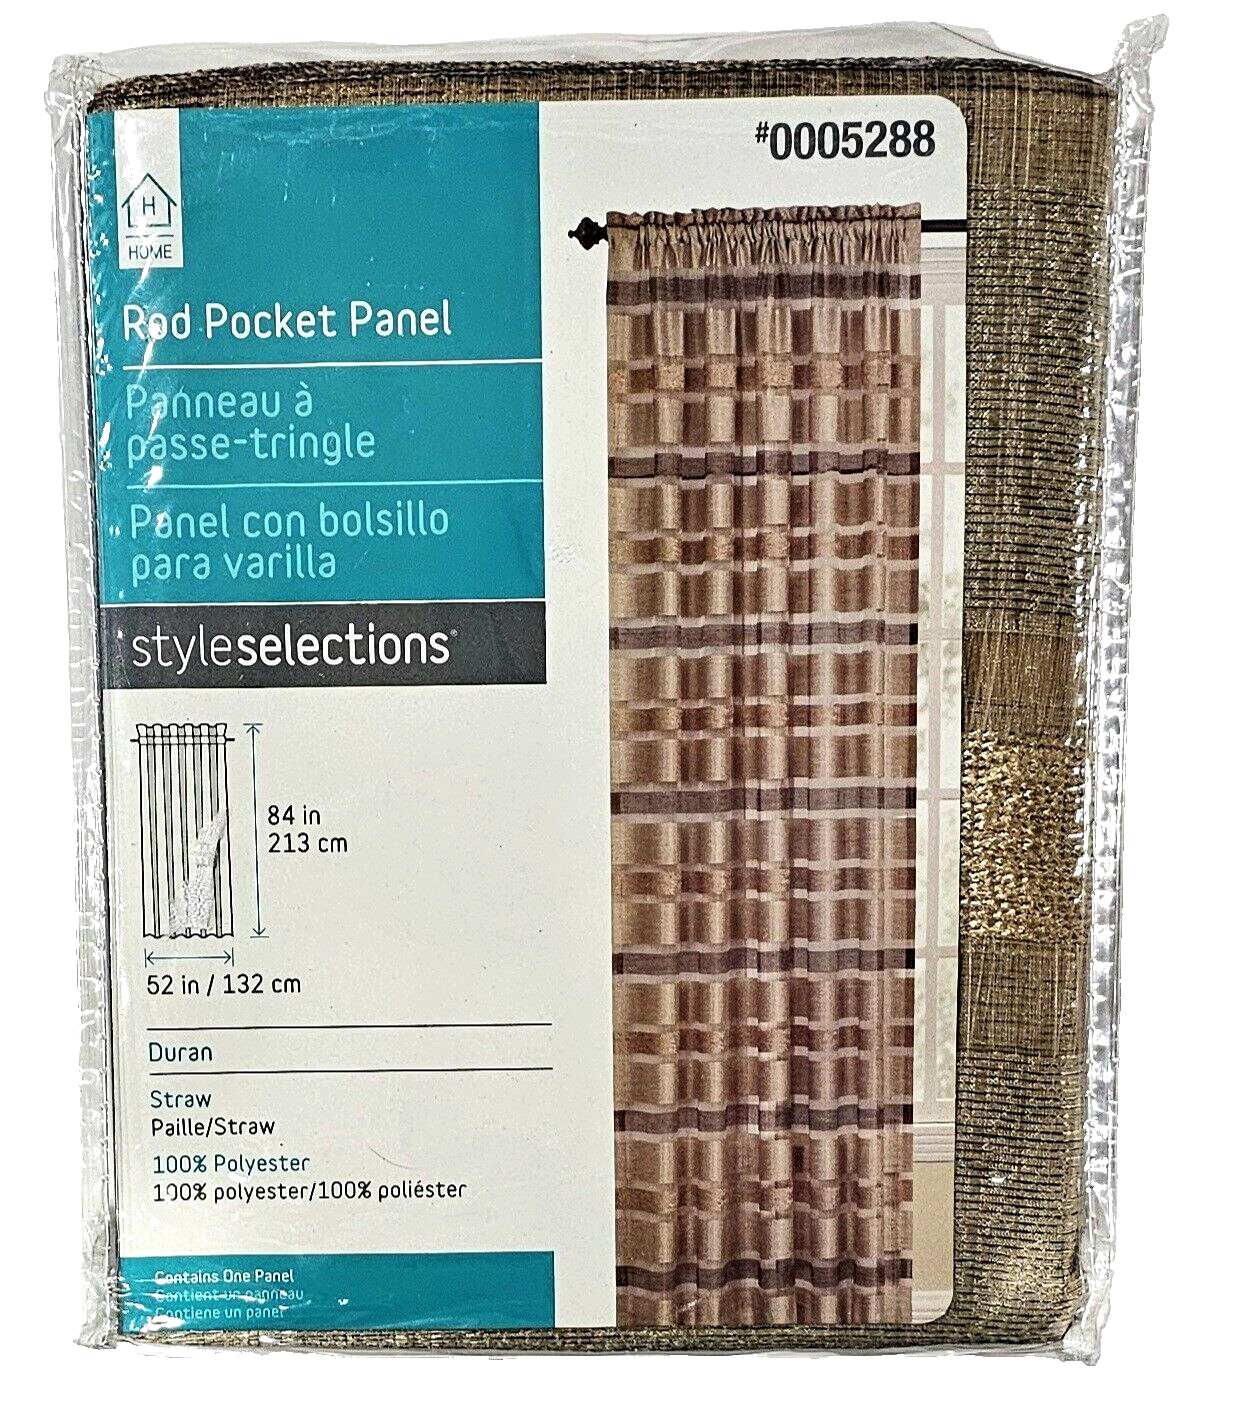 Home Rod Pocket Panel Style Selections 52x84in Duran Straw 0005288 - $19.99